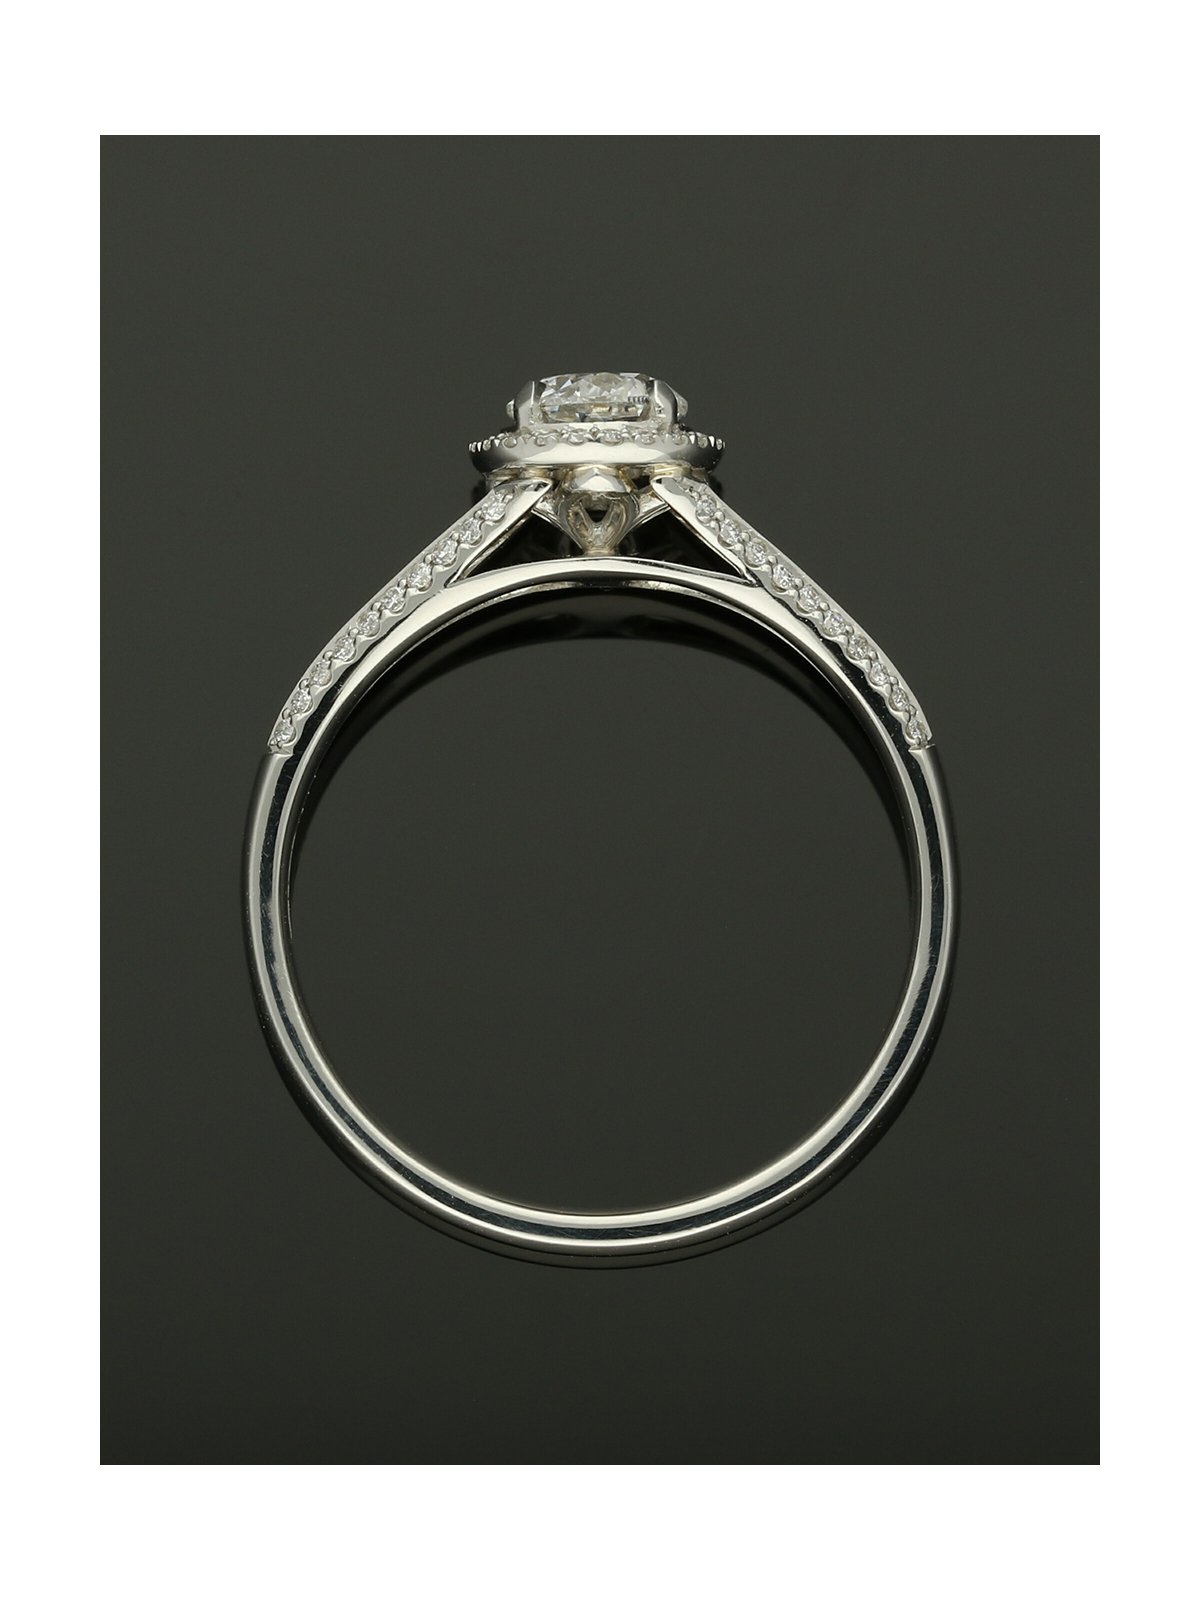 Diamond Halo Engagement Ring 0.50ct Certificated Round Brilliant Cut in Platinum with Diamond Shoulders